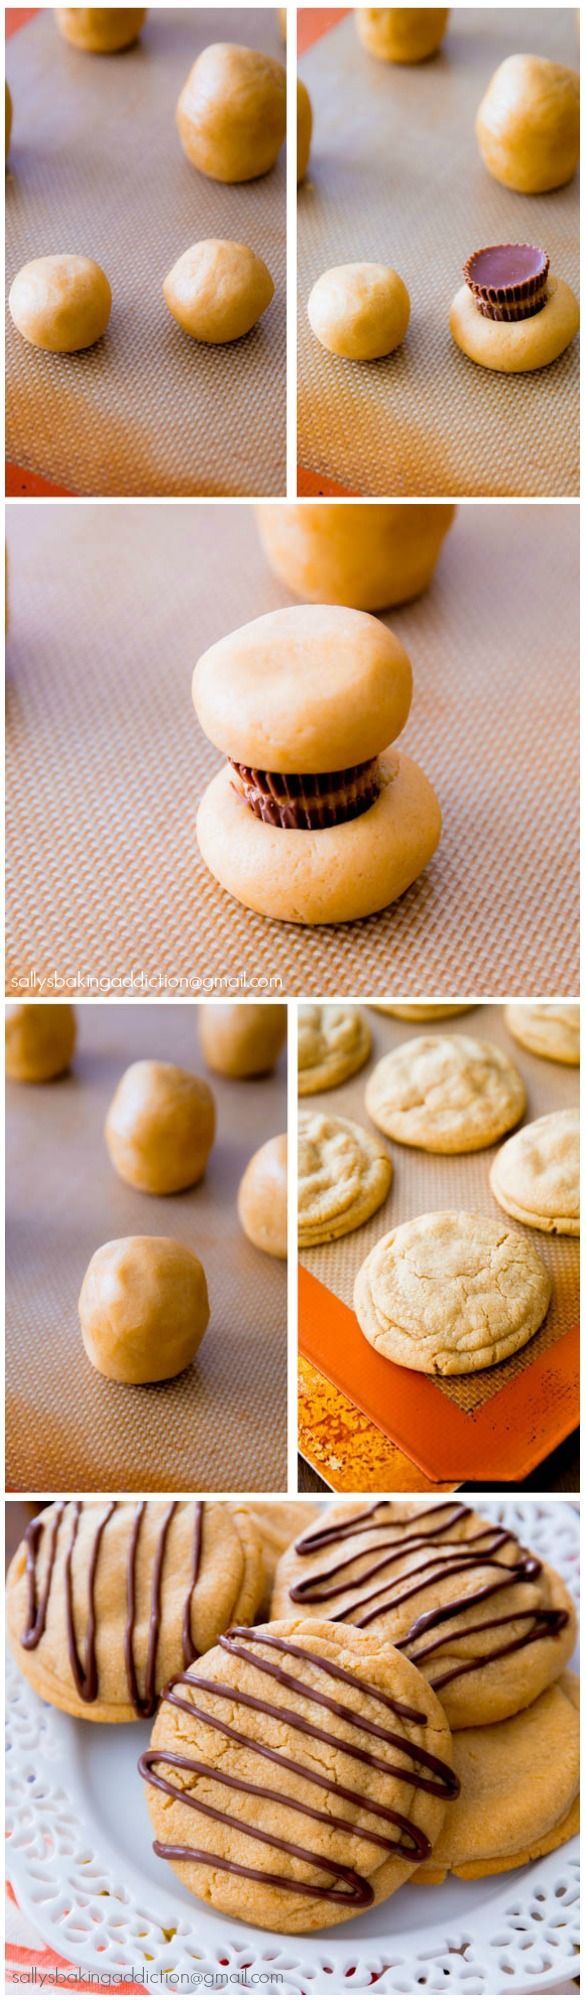 How to make Soft-Baked Reeses Stuff